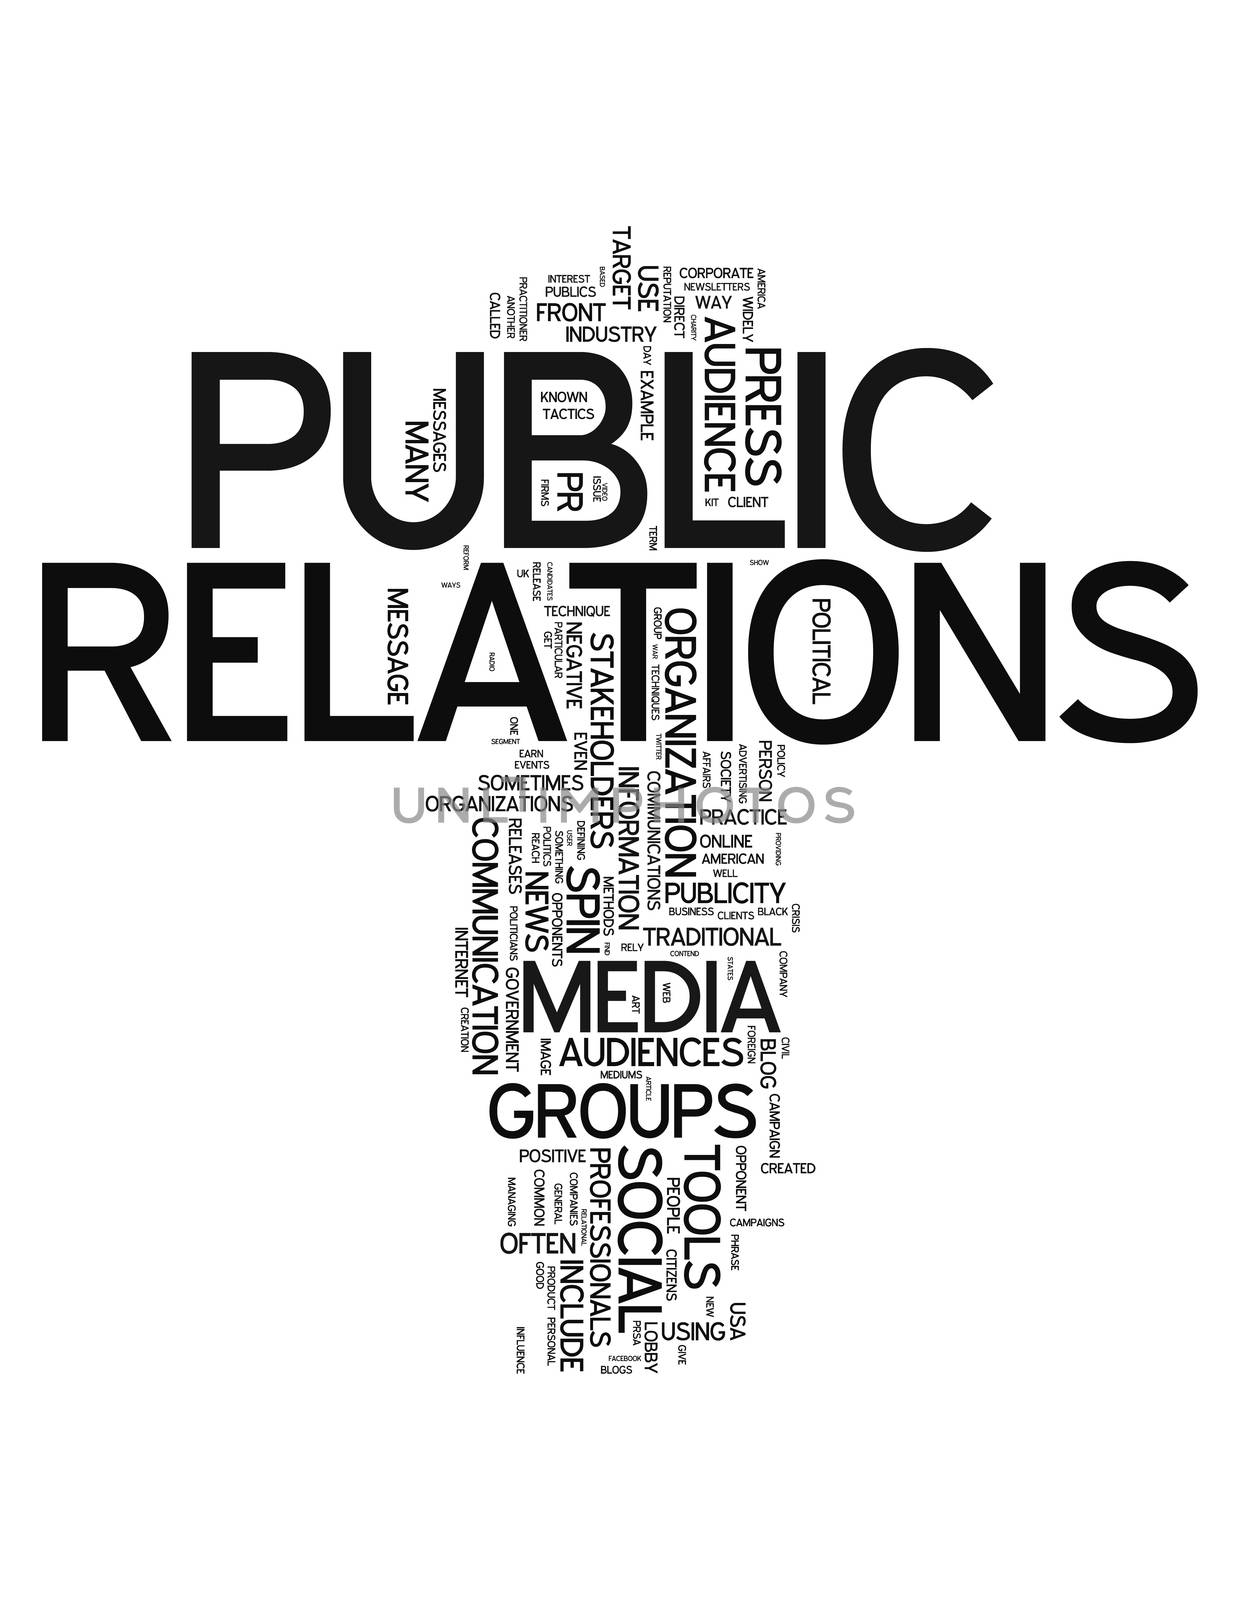 Word Cloud with Public Relations related tags